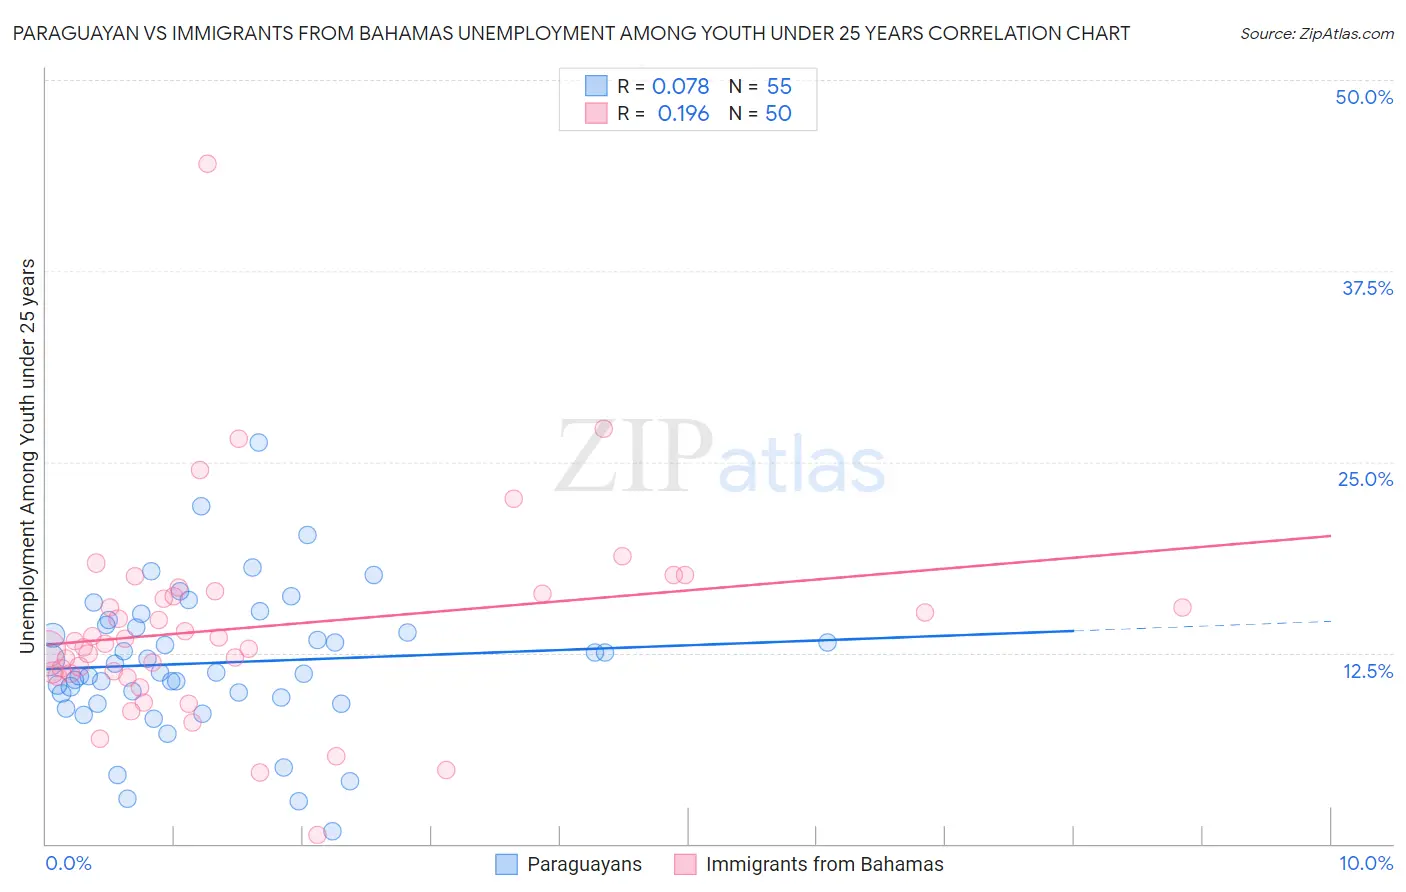 Paraguayan vs Immigrants from Bahamas Unemployment Among Youth under 25 years